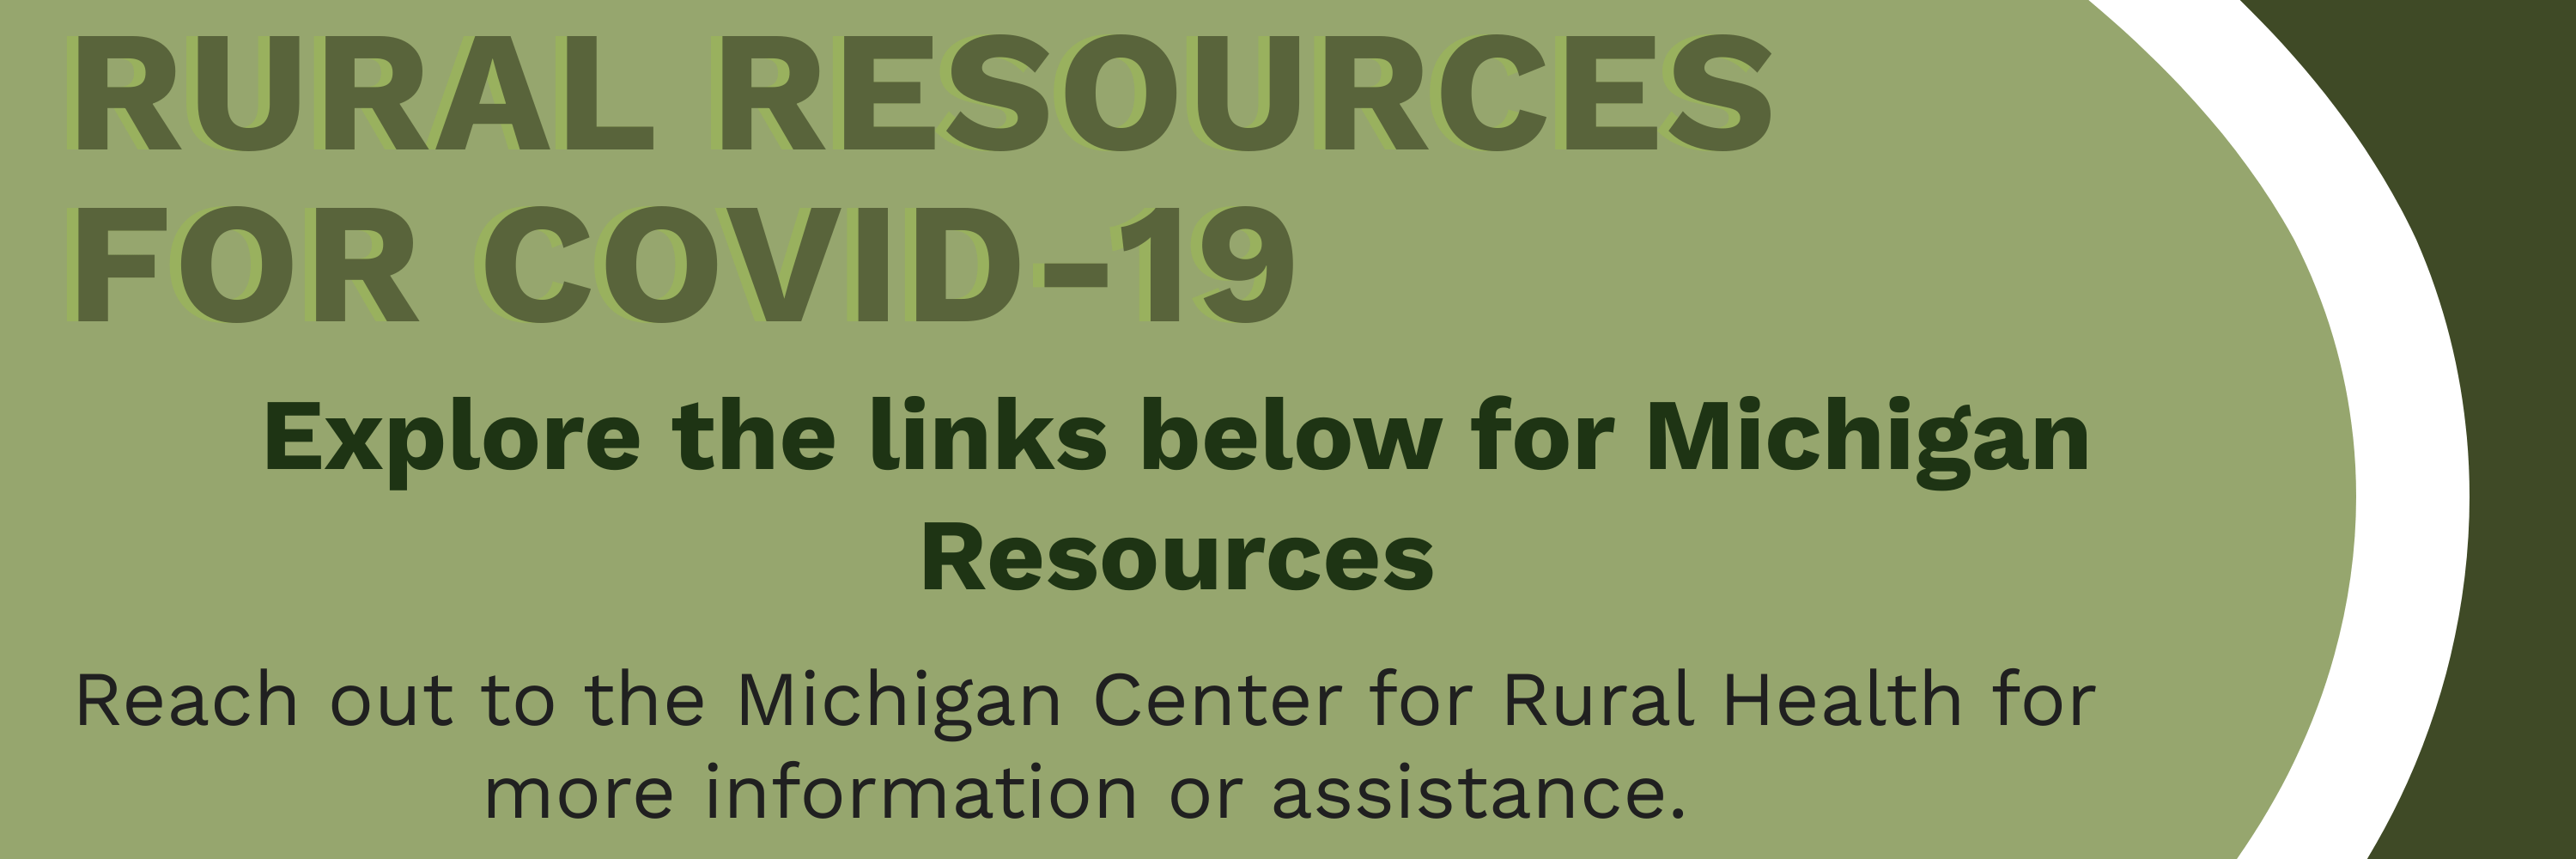 RuralResources for COVID-19: Explore the links below for Michigan Resources Reach out to the Michigan Center for Rural Health for more information or assistance.